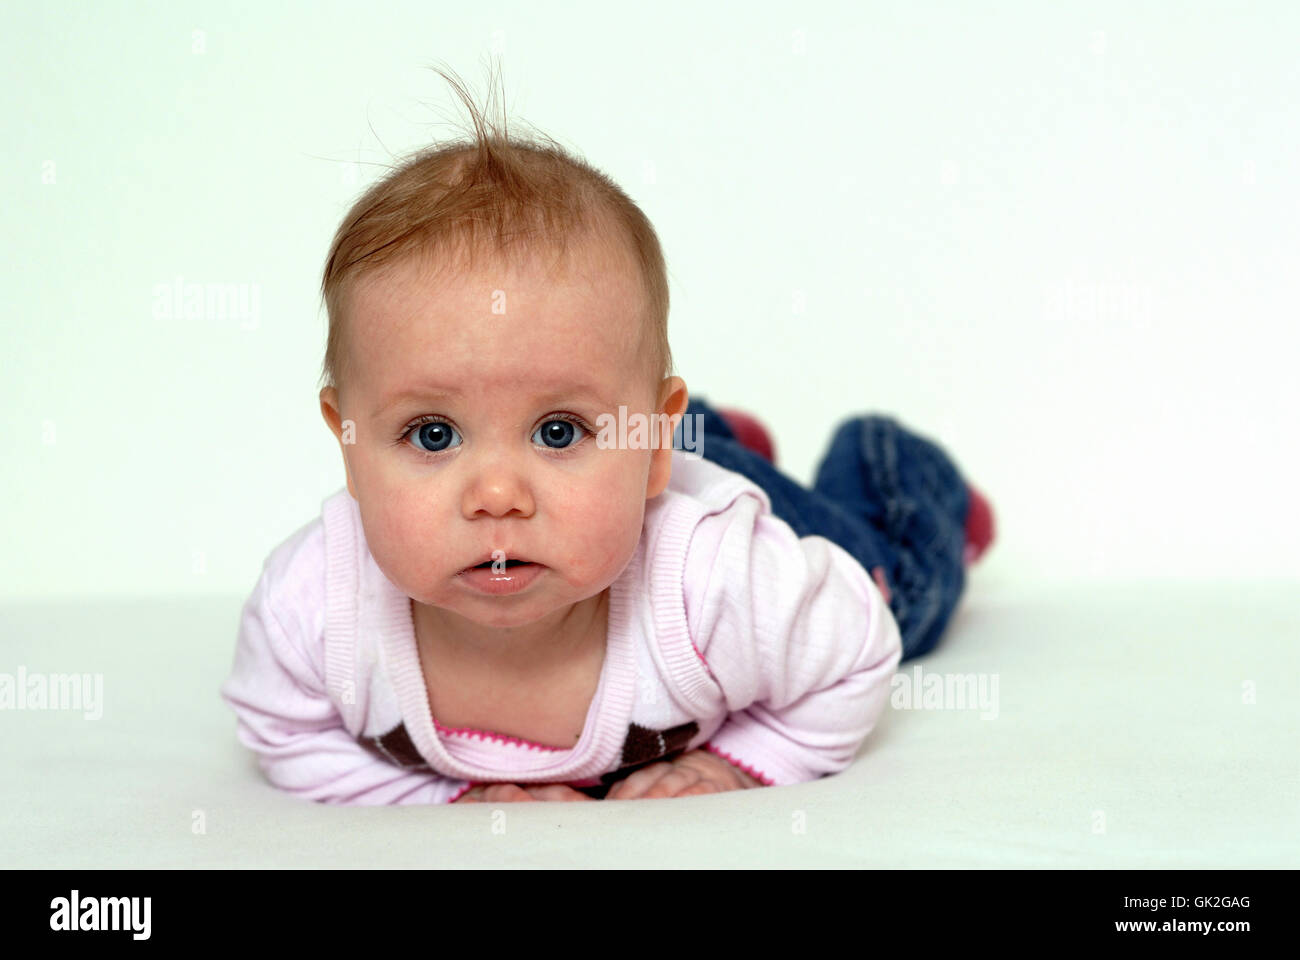 baby expression childhood Stock Photo